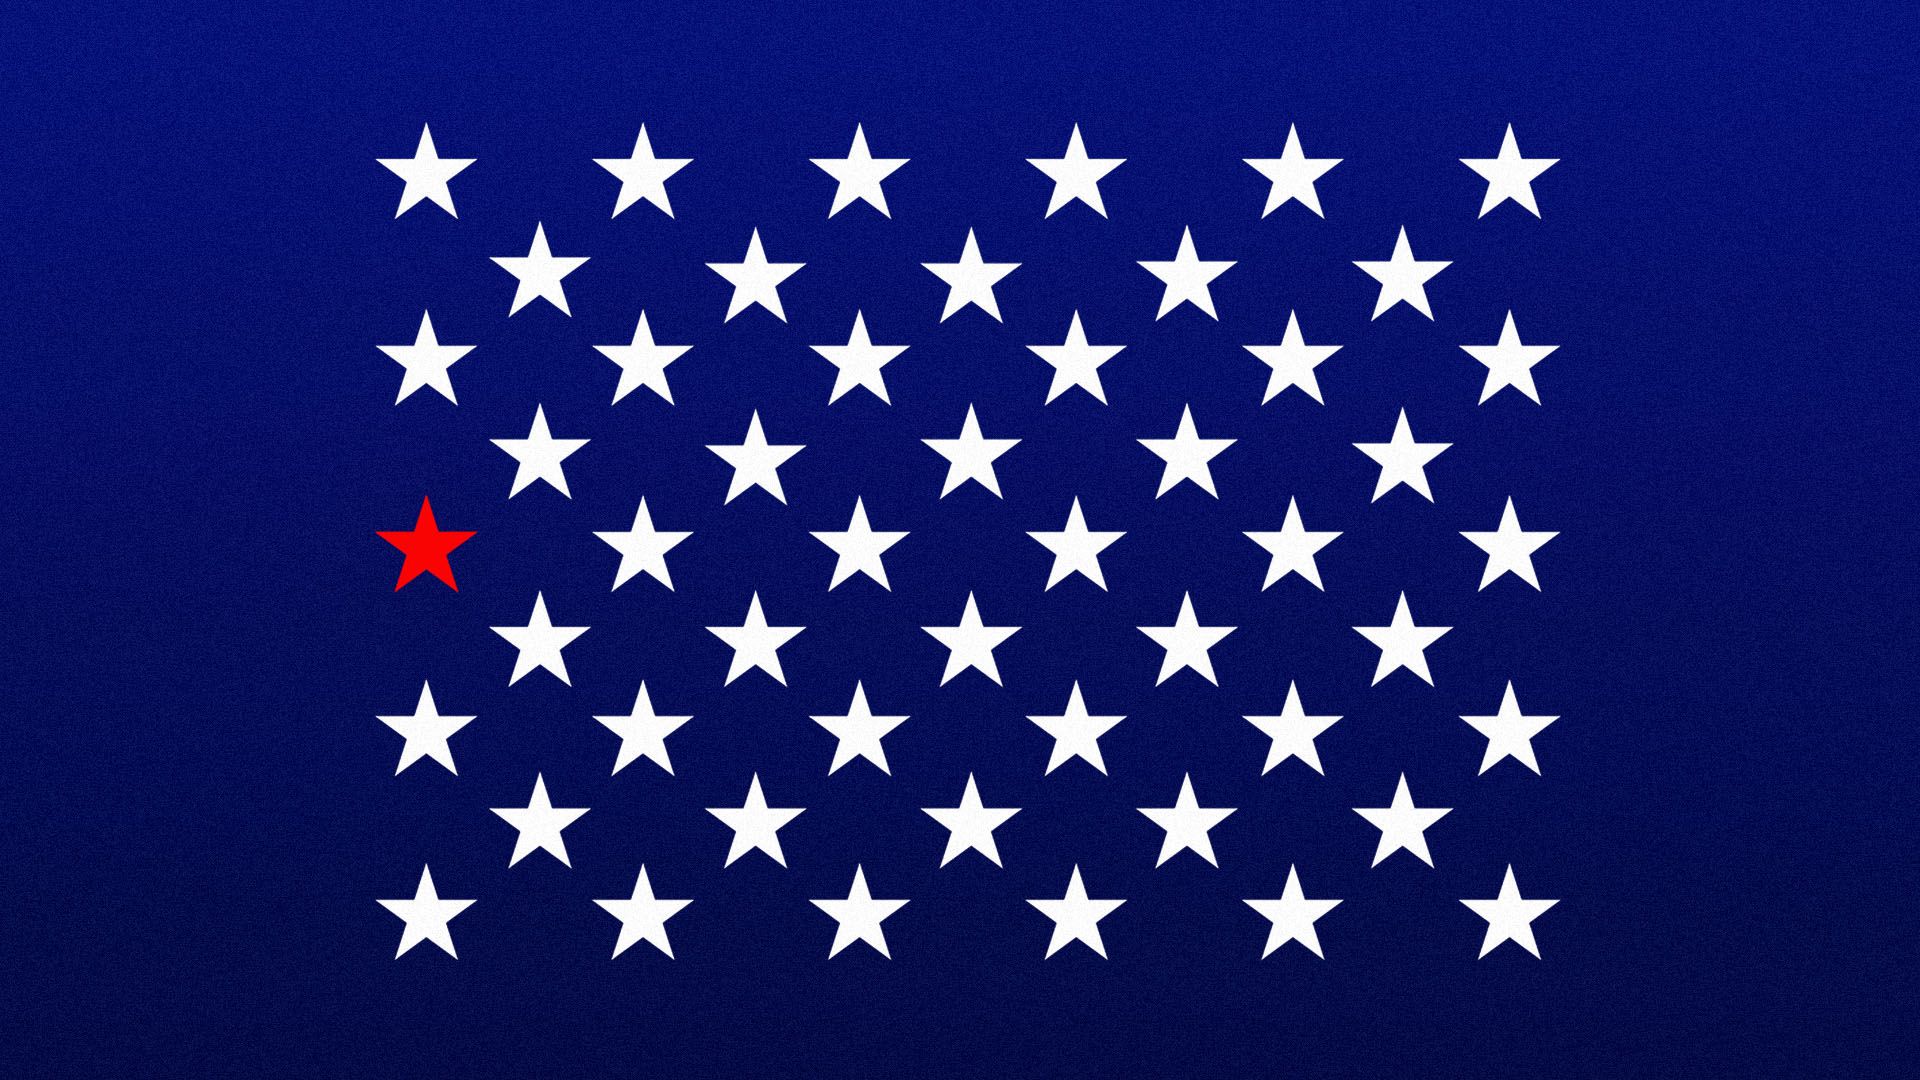  Illustration of one red star representing California amongst the field of 50 white stars on the United States flag